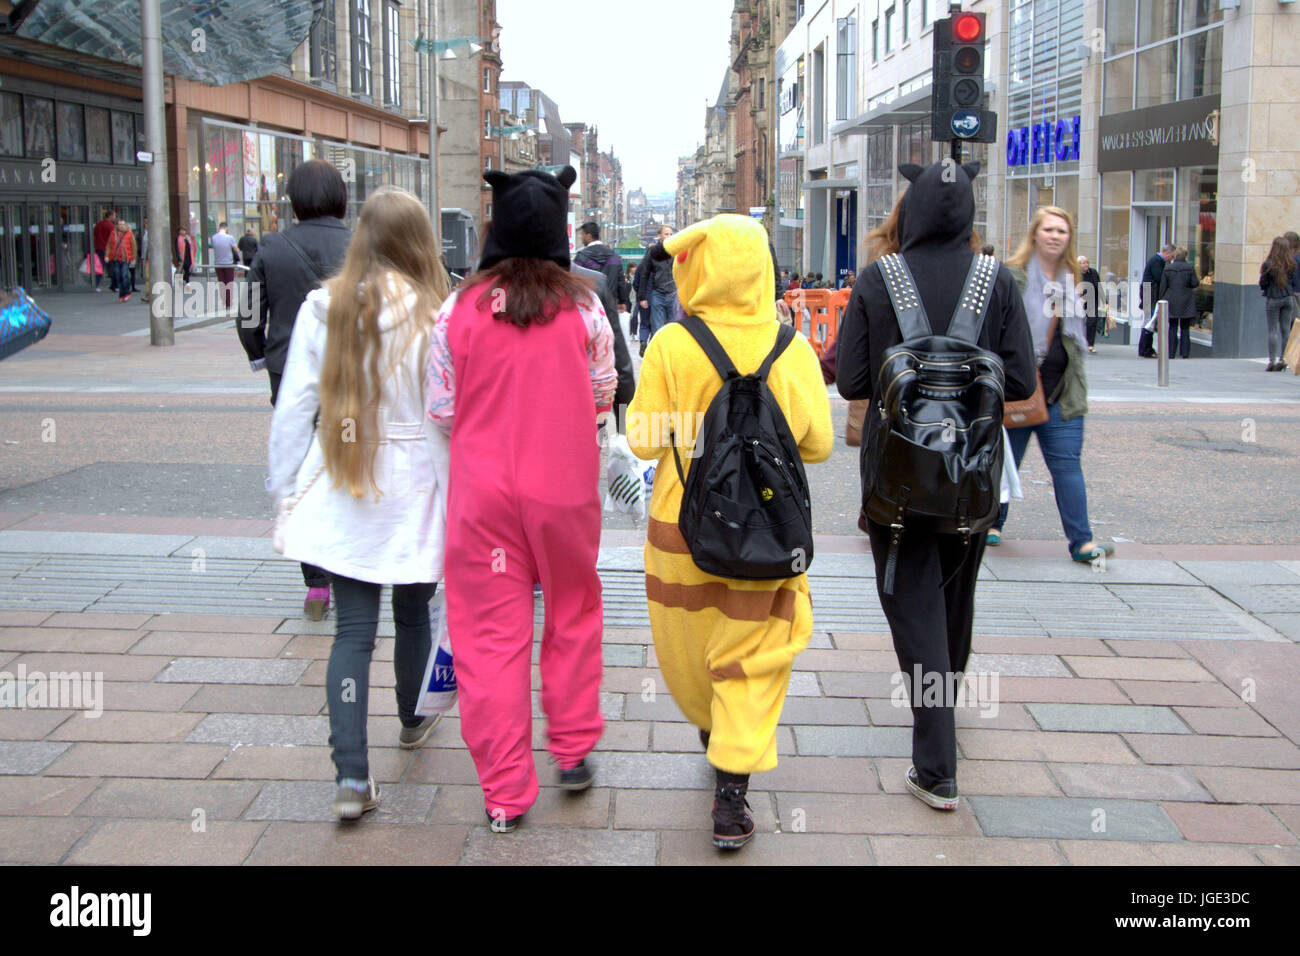 onesy fashion faux pas all in one outfit  four young girls teenagers onesies and loungewear onepiece on the street Stock Photo